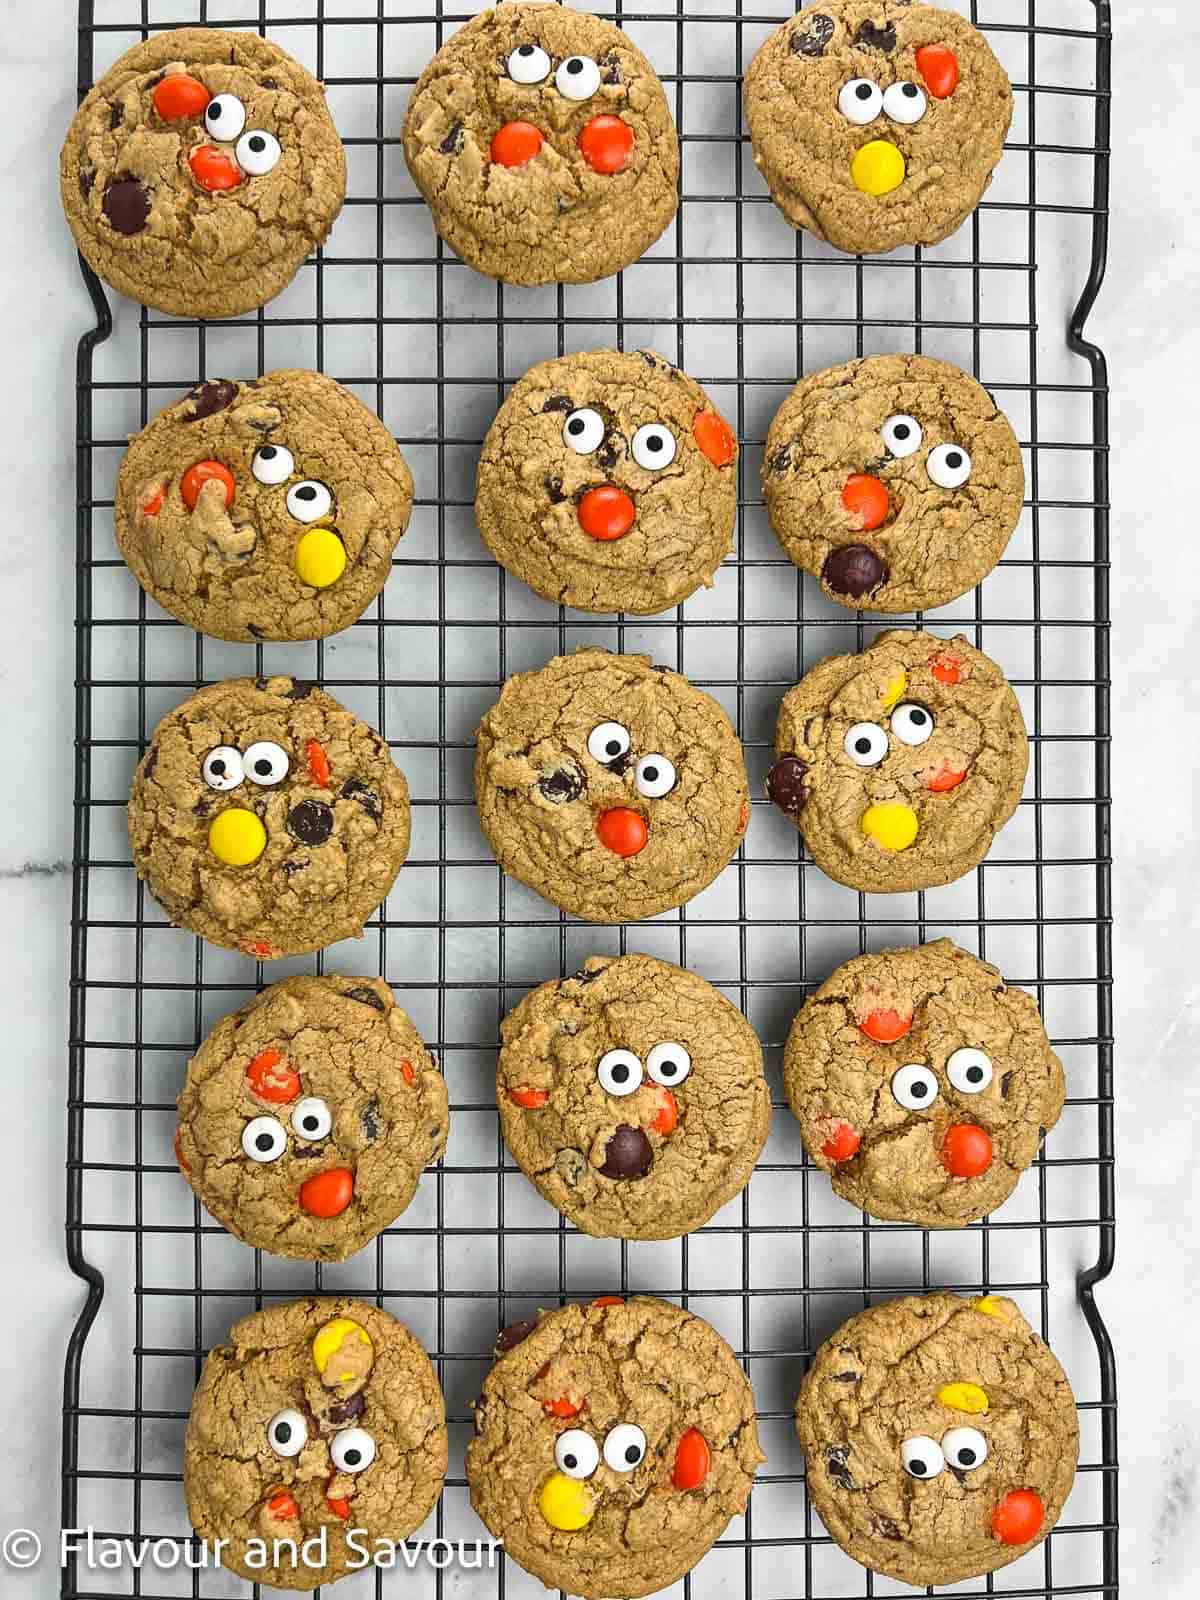 Gluten-free Reese's Pieces Monster Eyeball Cookies with candy eyes on a wire rack.